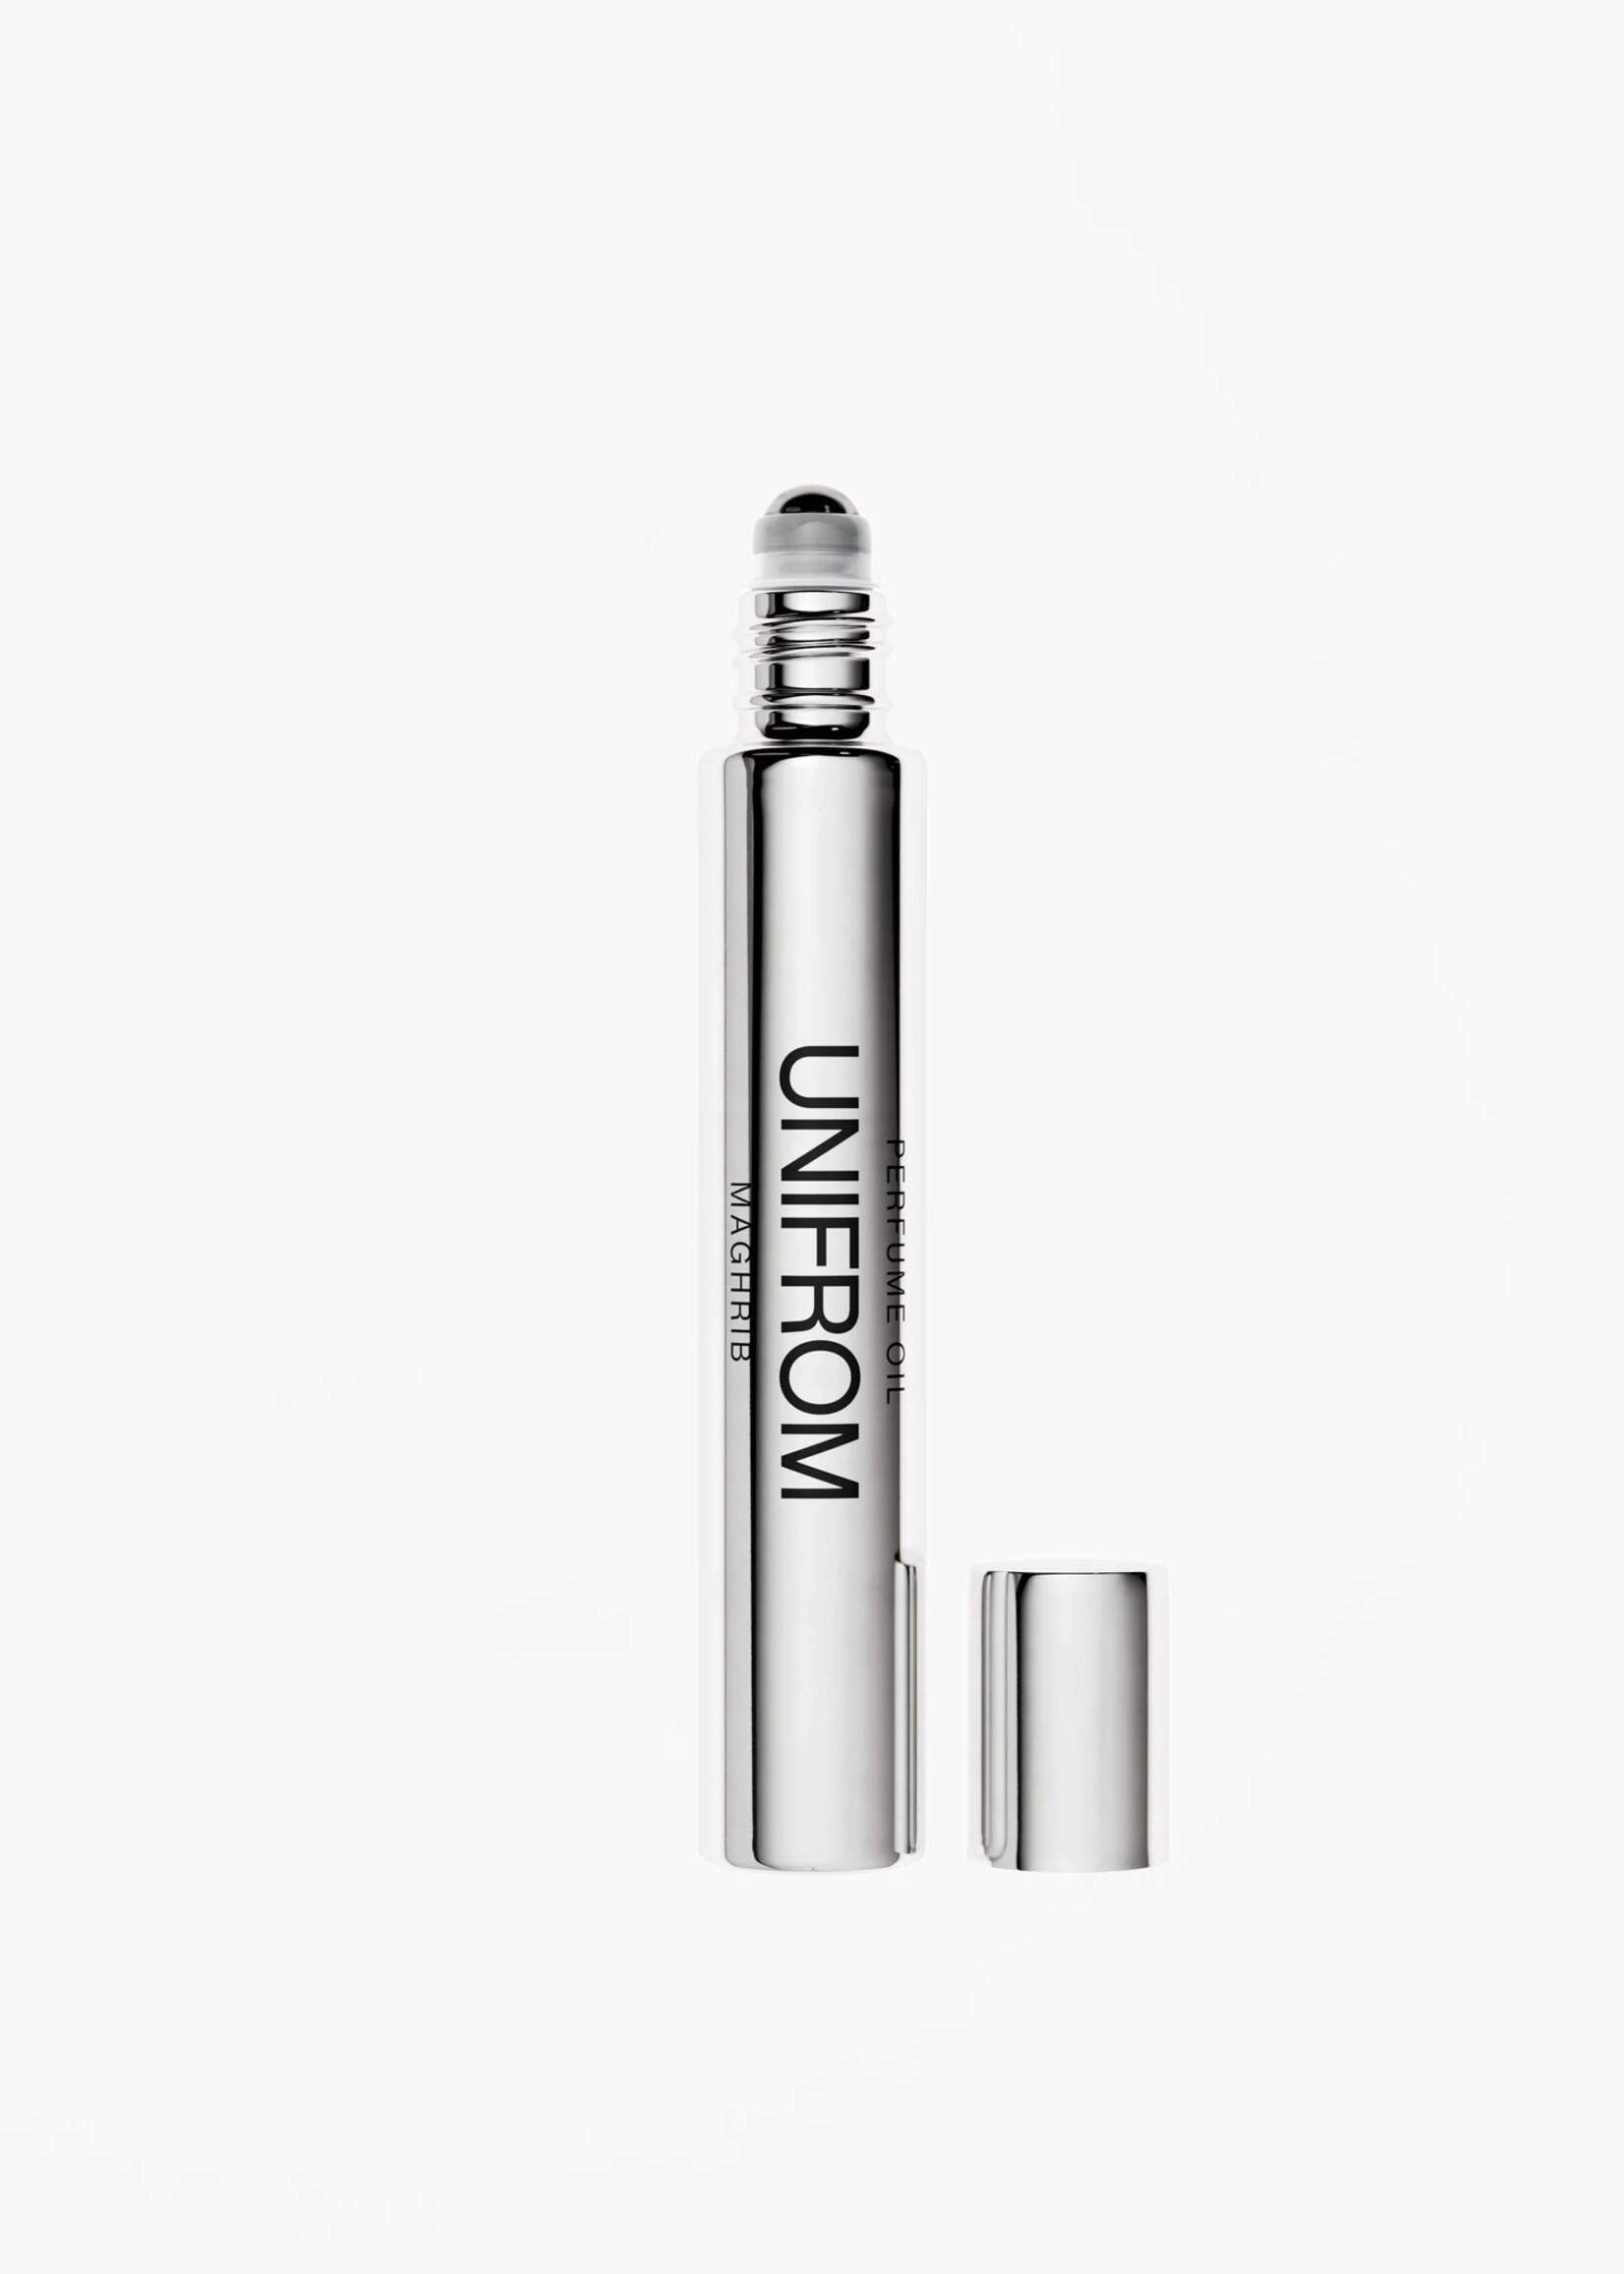 UNIFROM MAGHRIB Roll-on Perfume Oil 10ml